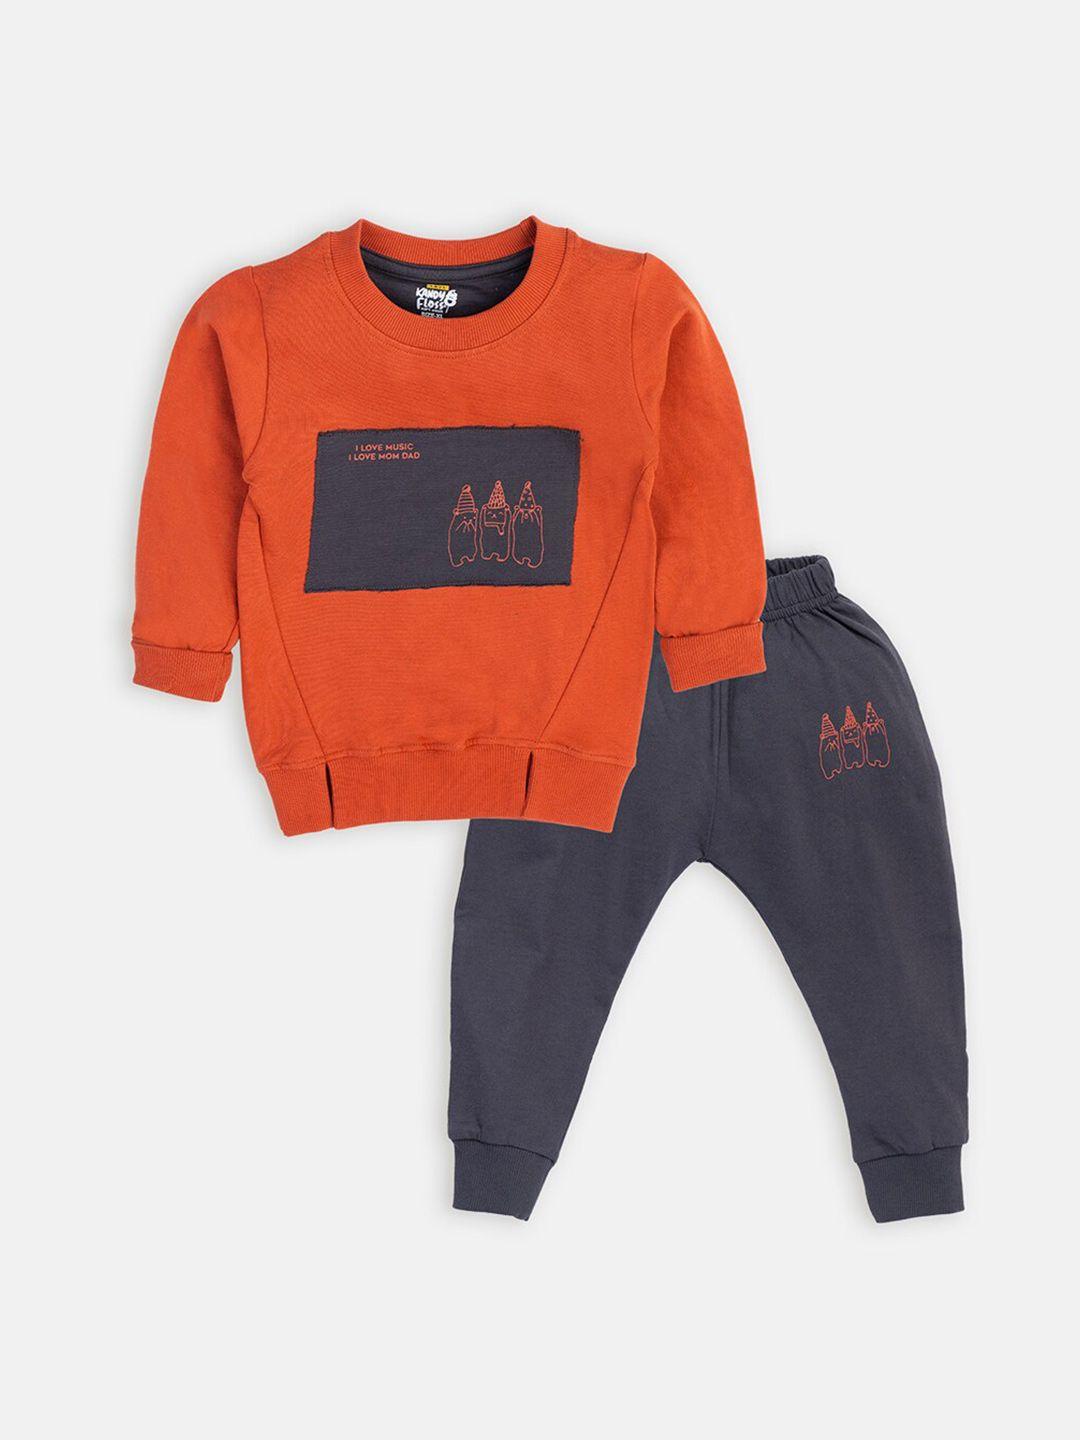 amul kandyfloss kids orange & grey printed t-shirt with trousers